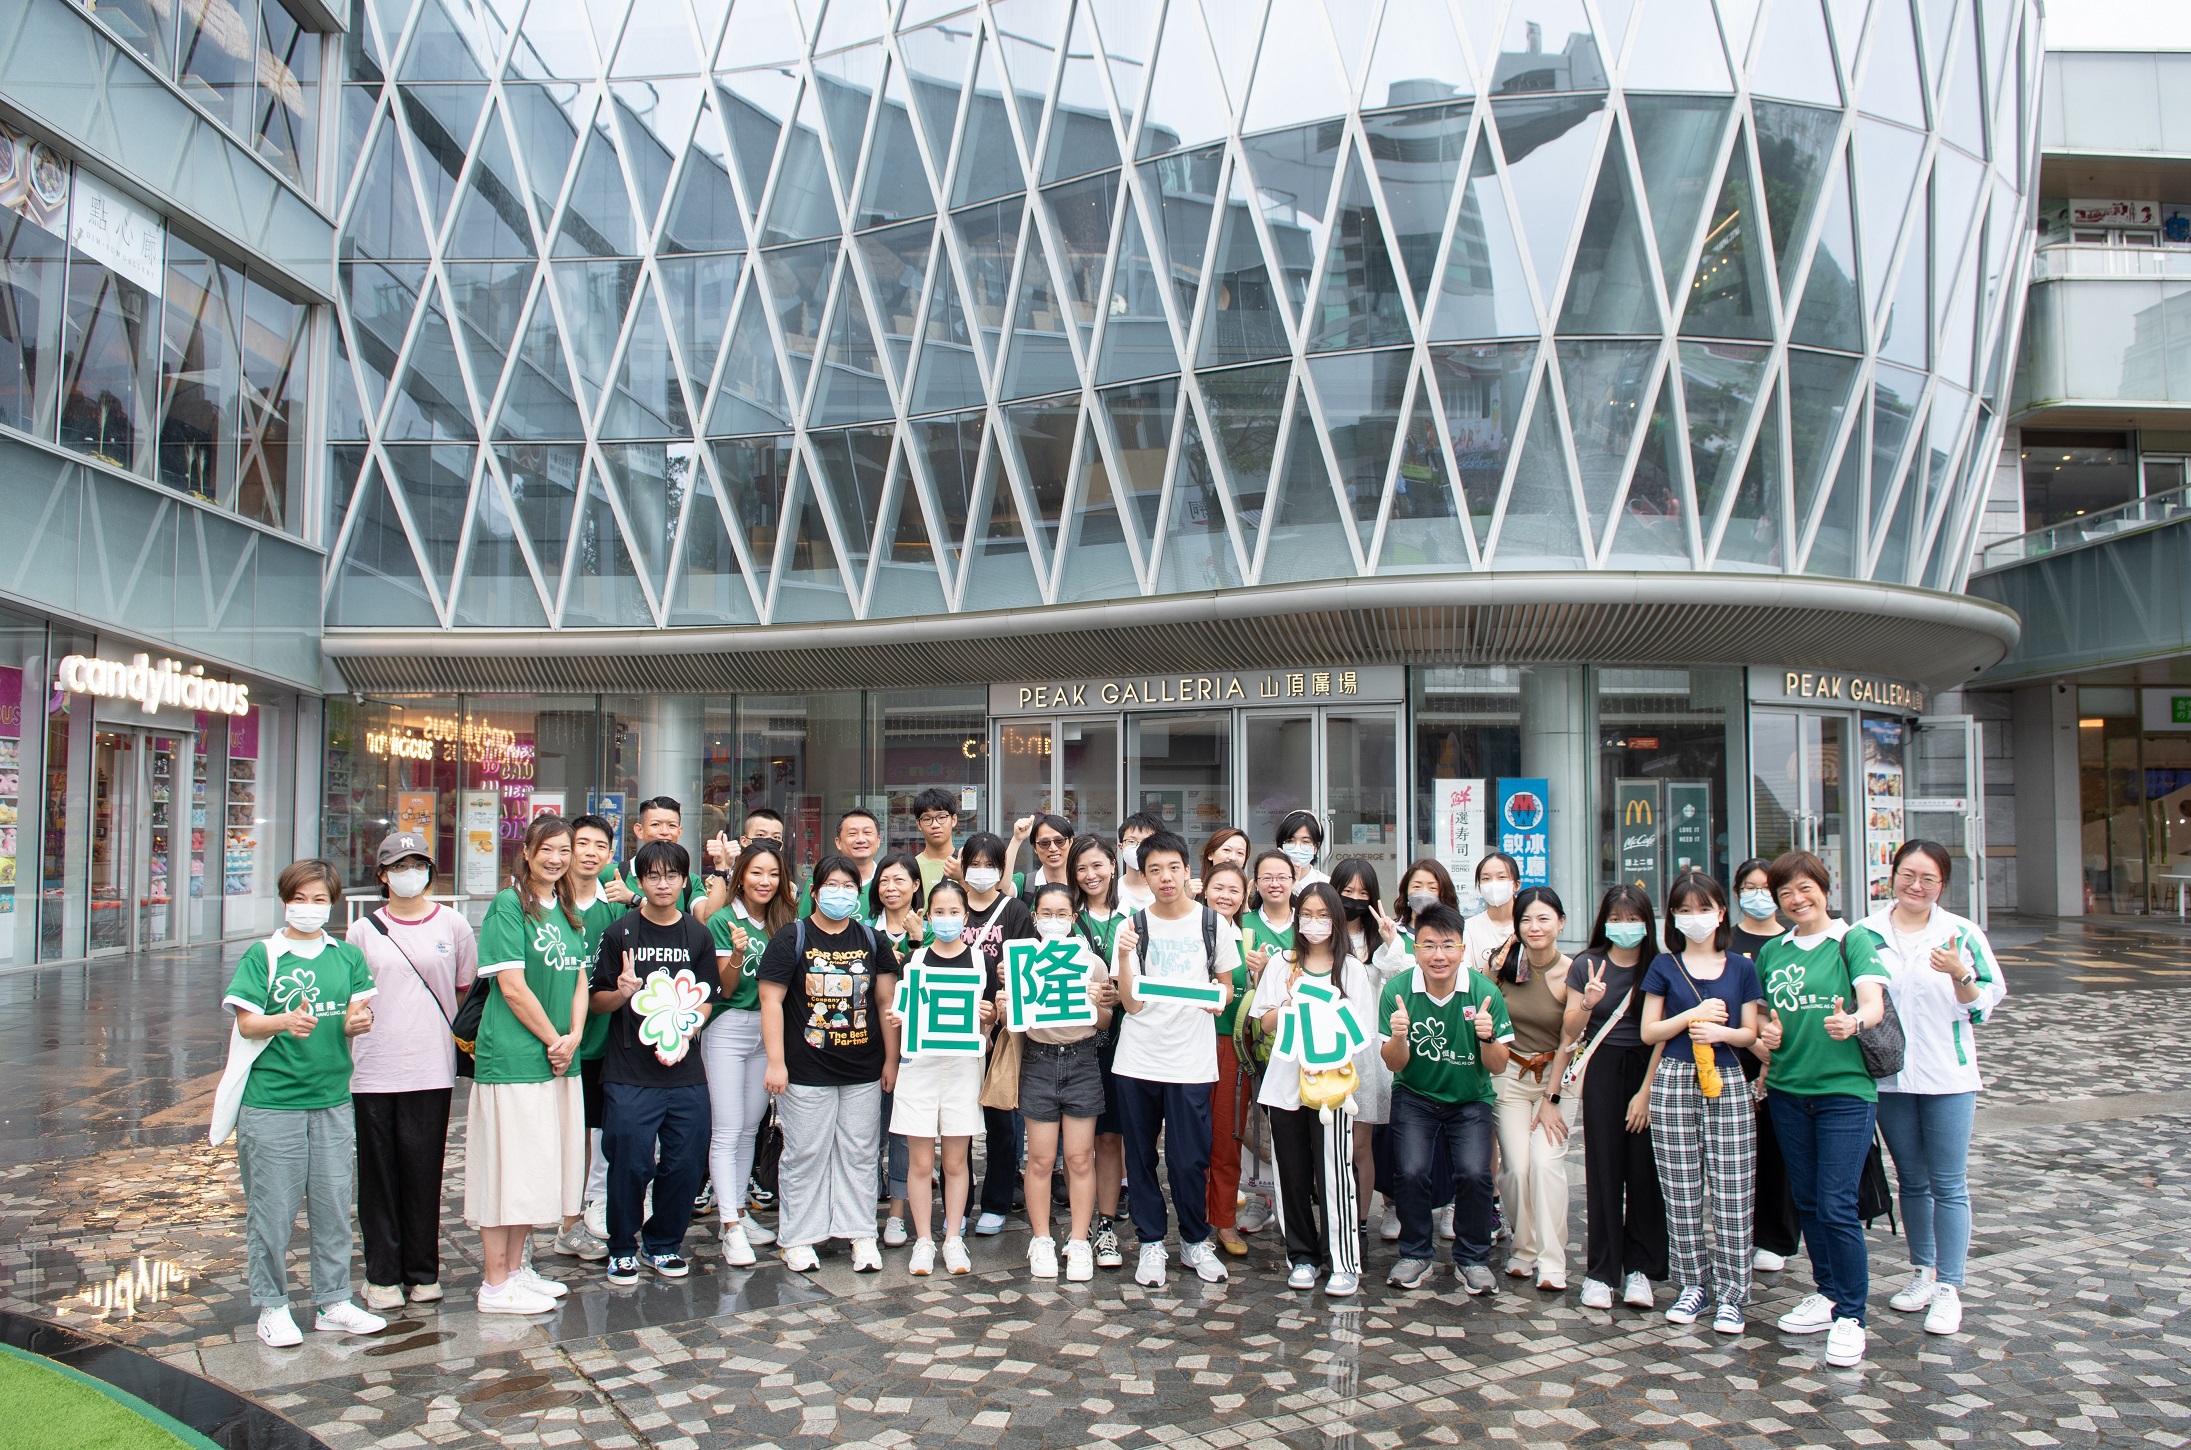 Mentees of the Strive and Rise Programme and mentors from the Hang Lung As One Volunteer Team visit Peak Galleria to learn about the daily operations of the mall, providing mentees valuable insights into the world of work